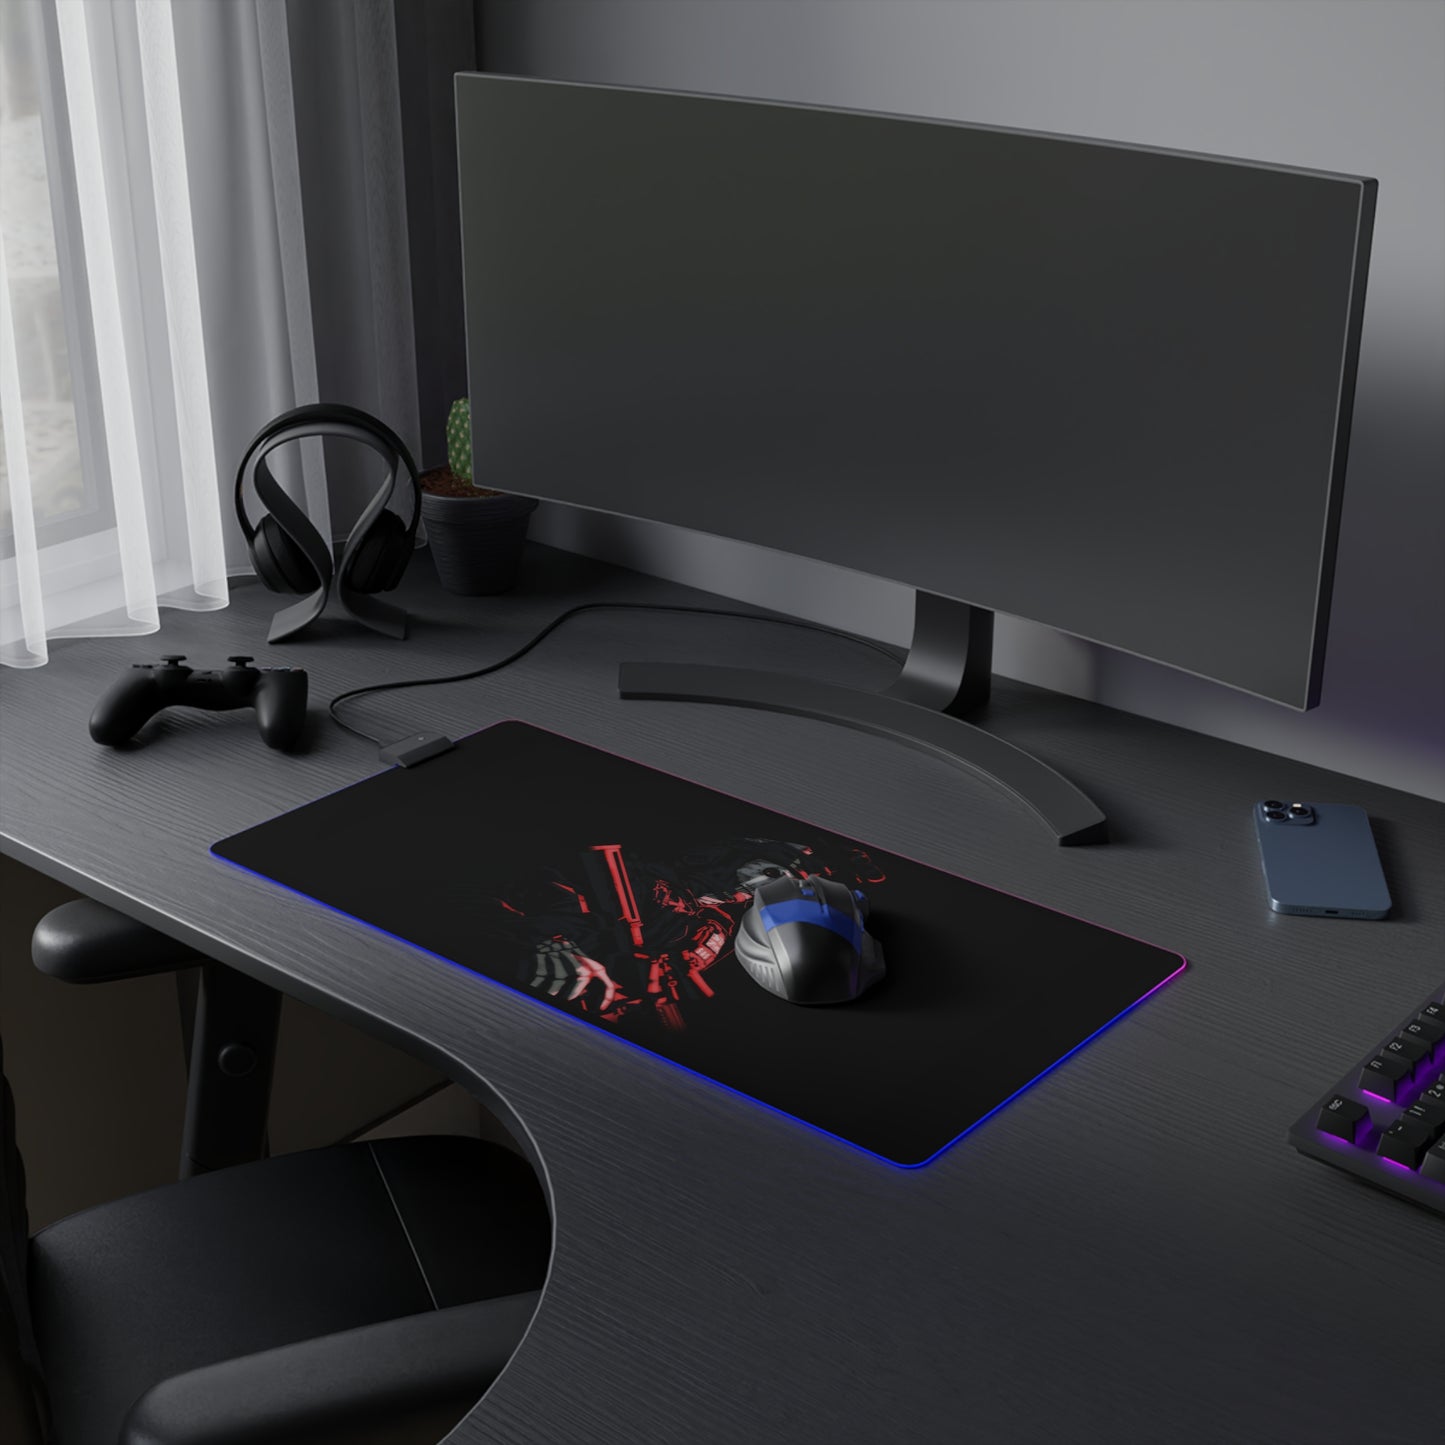 COD 001 -  LED Gaming Mouse Pad